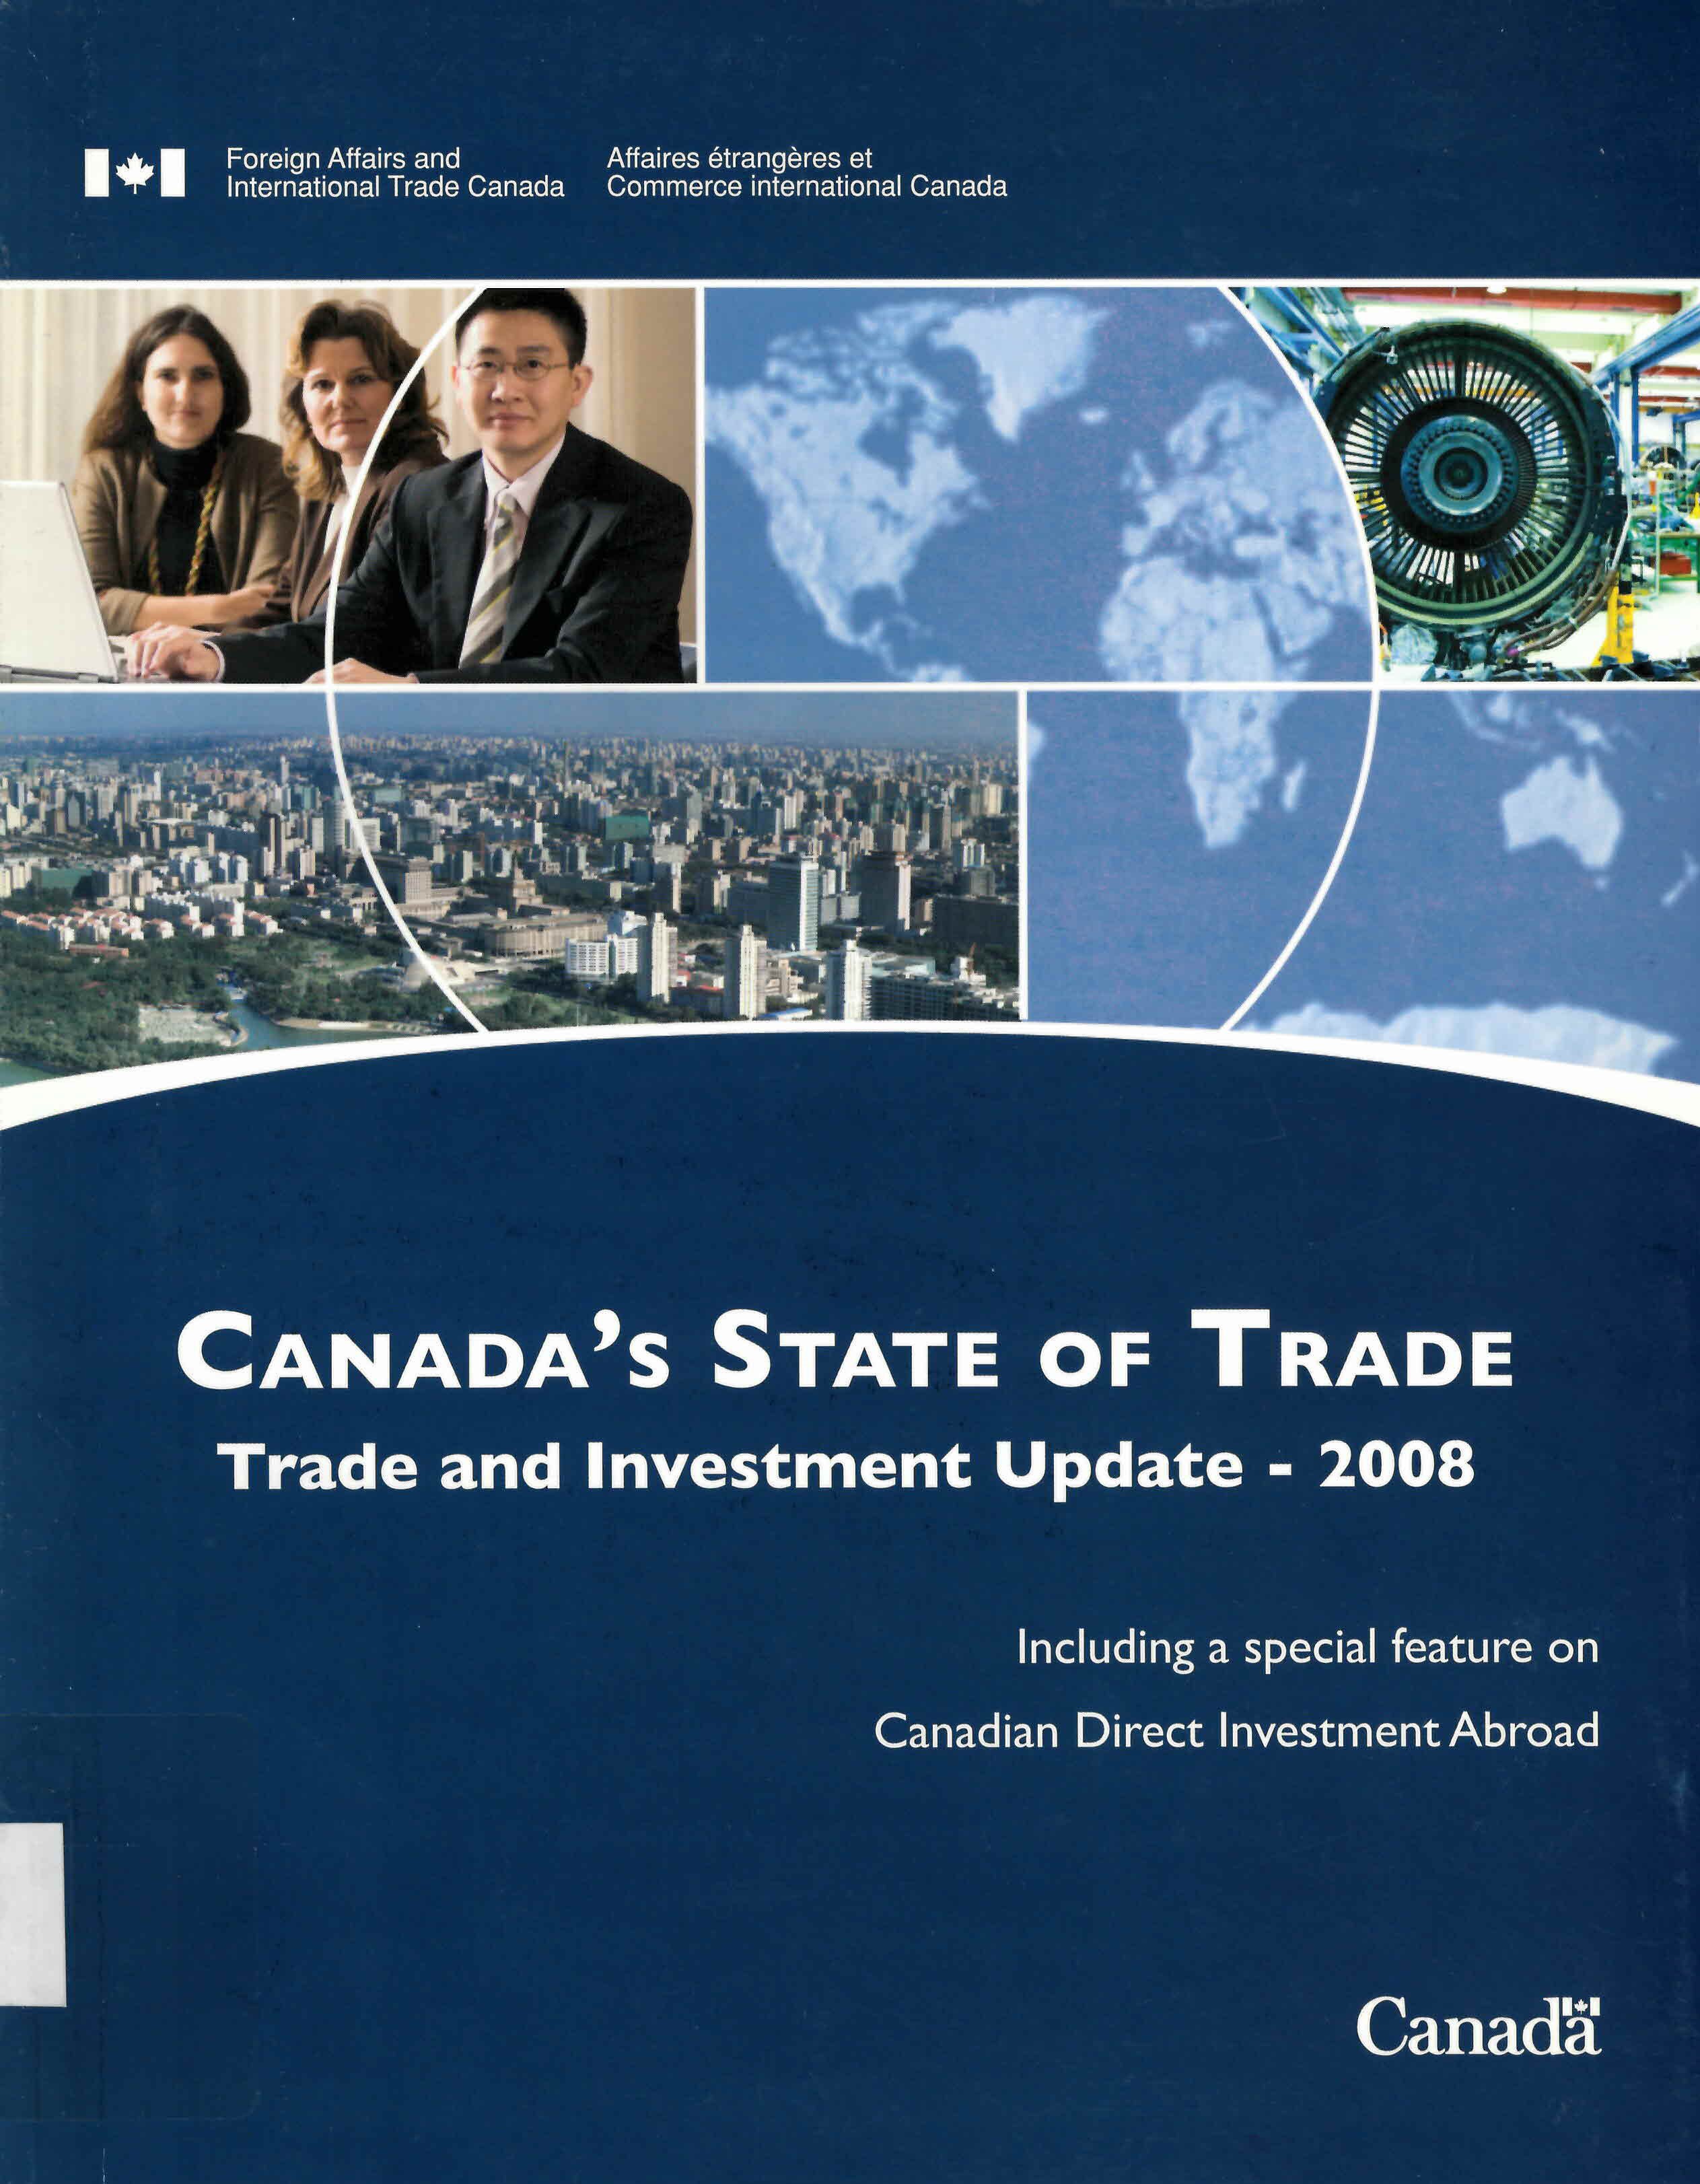 Canada's state of trade = le commerce international du Canada : trade and inverstment update.